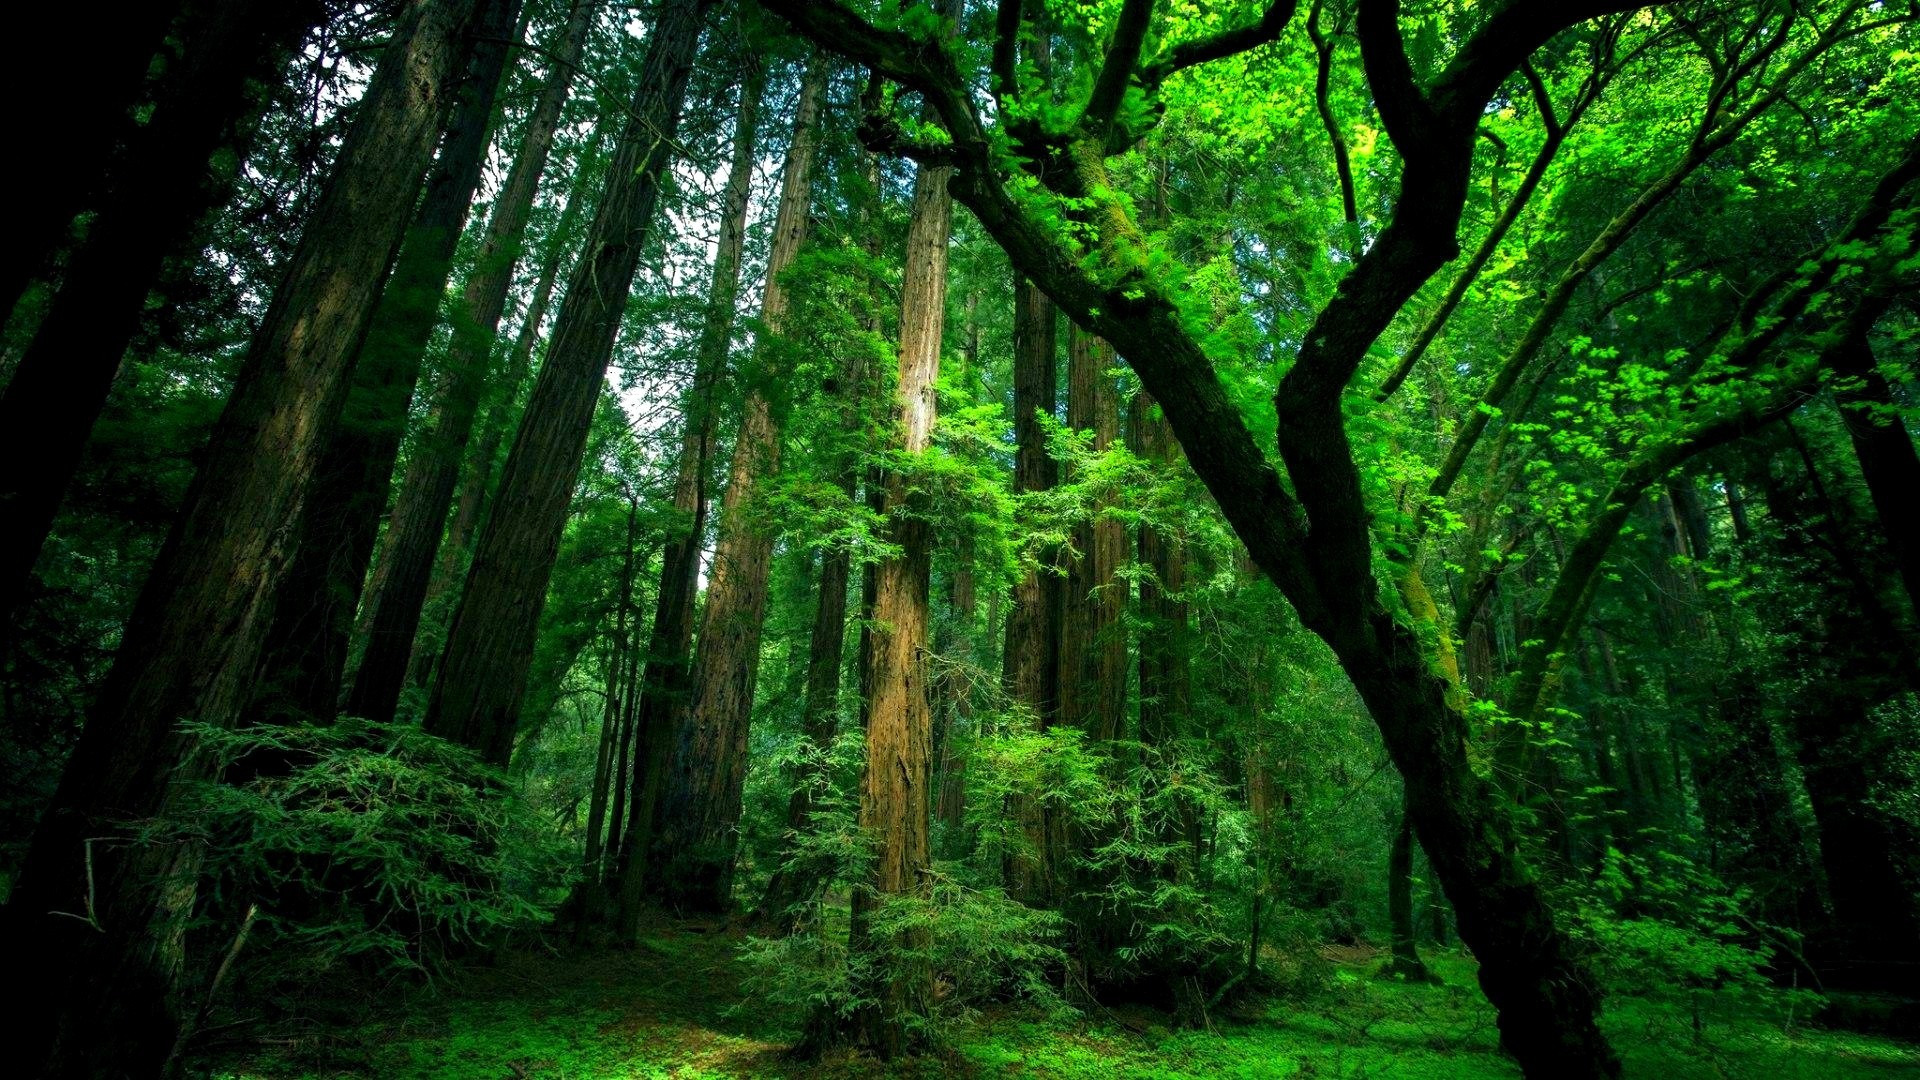  Natural green forest wallpaper Full HD Wallpapers Points